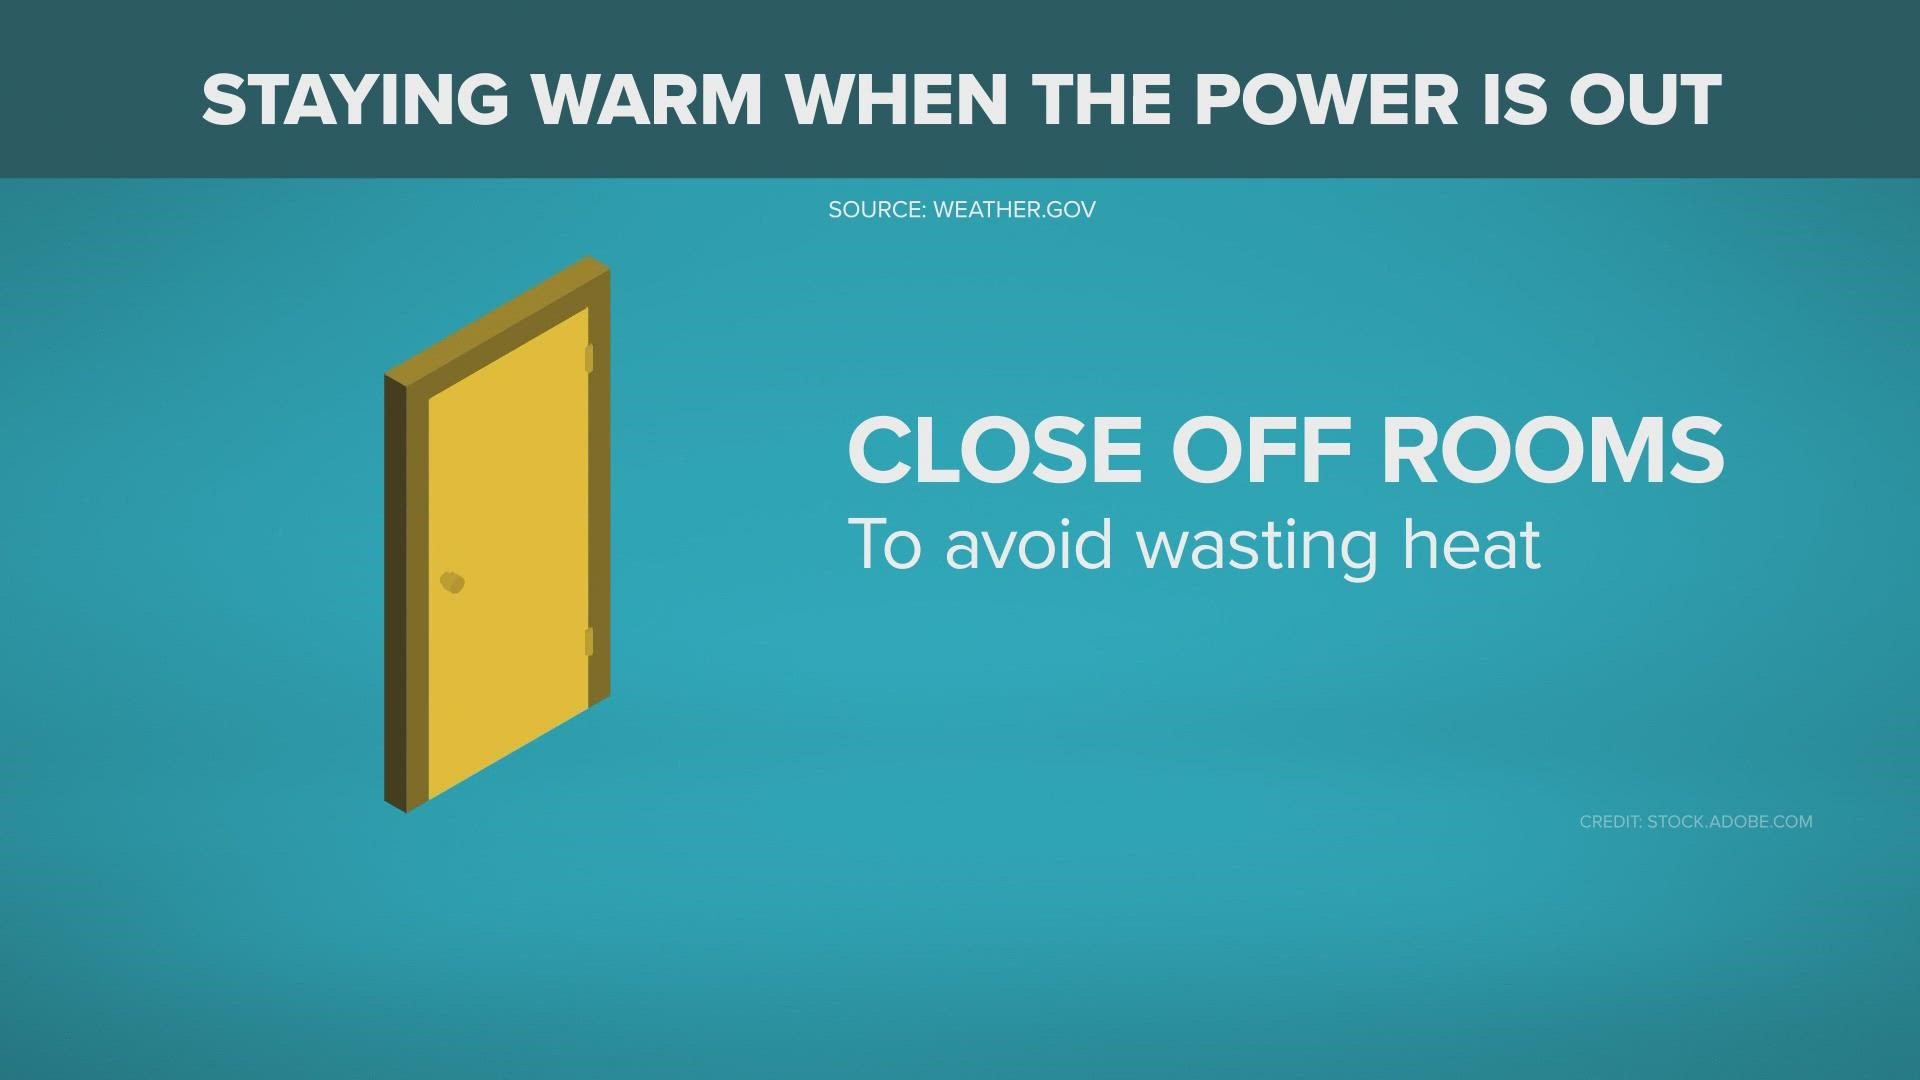 Here are some tips on how to stay warm if your power goes out.